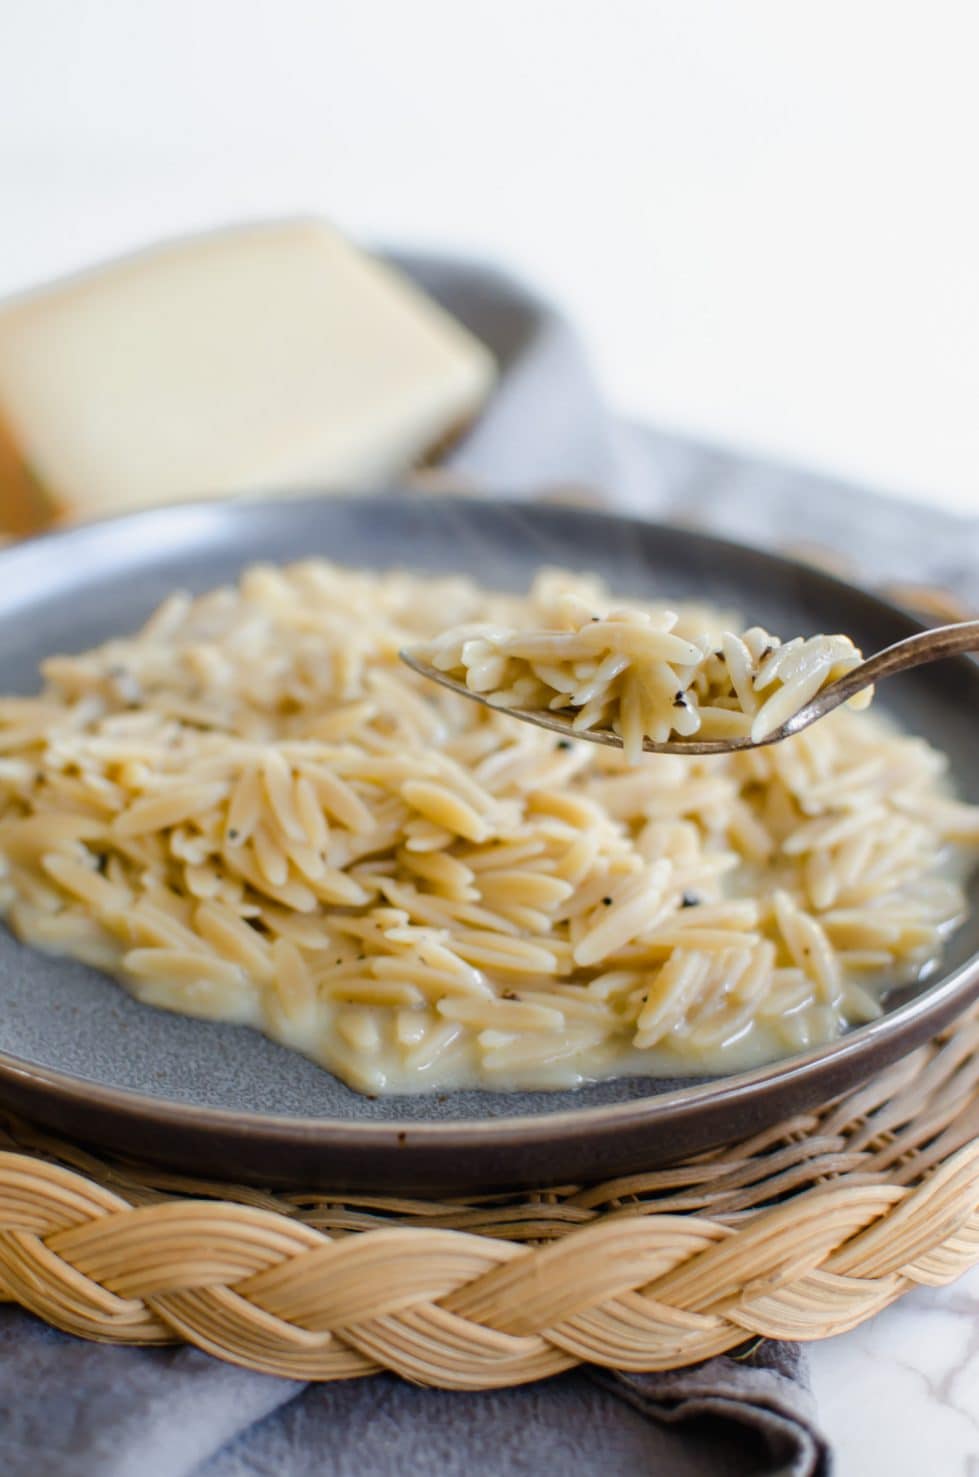 Photo of orzo pasta cacio y pepe on a blue plate.